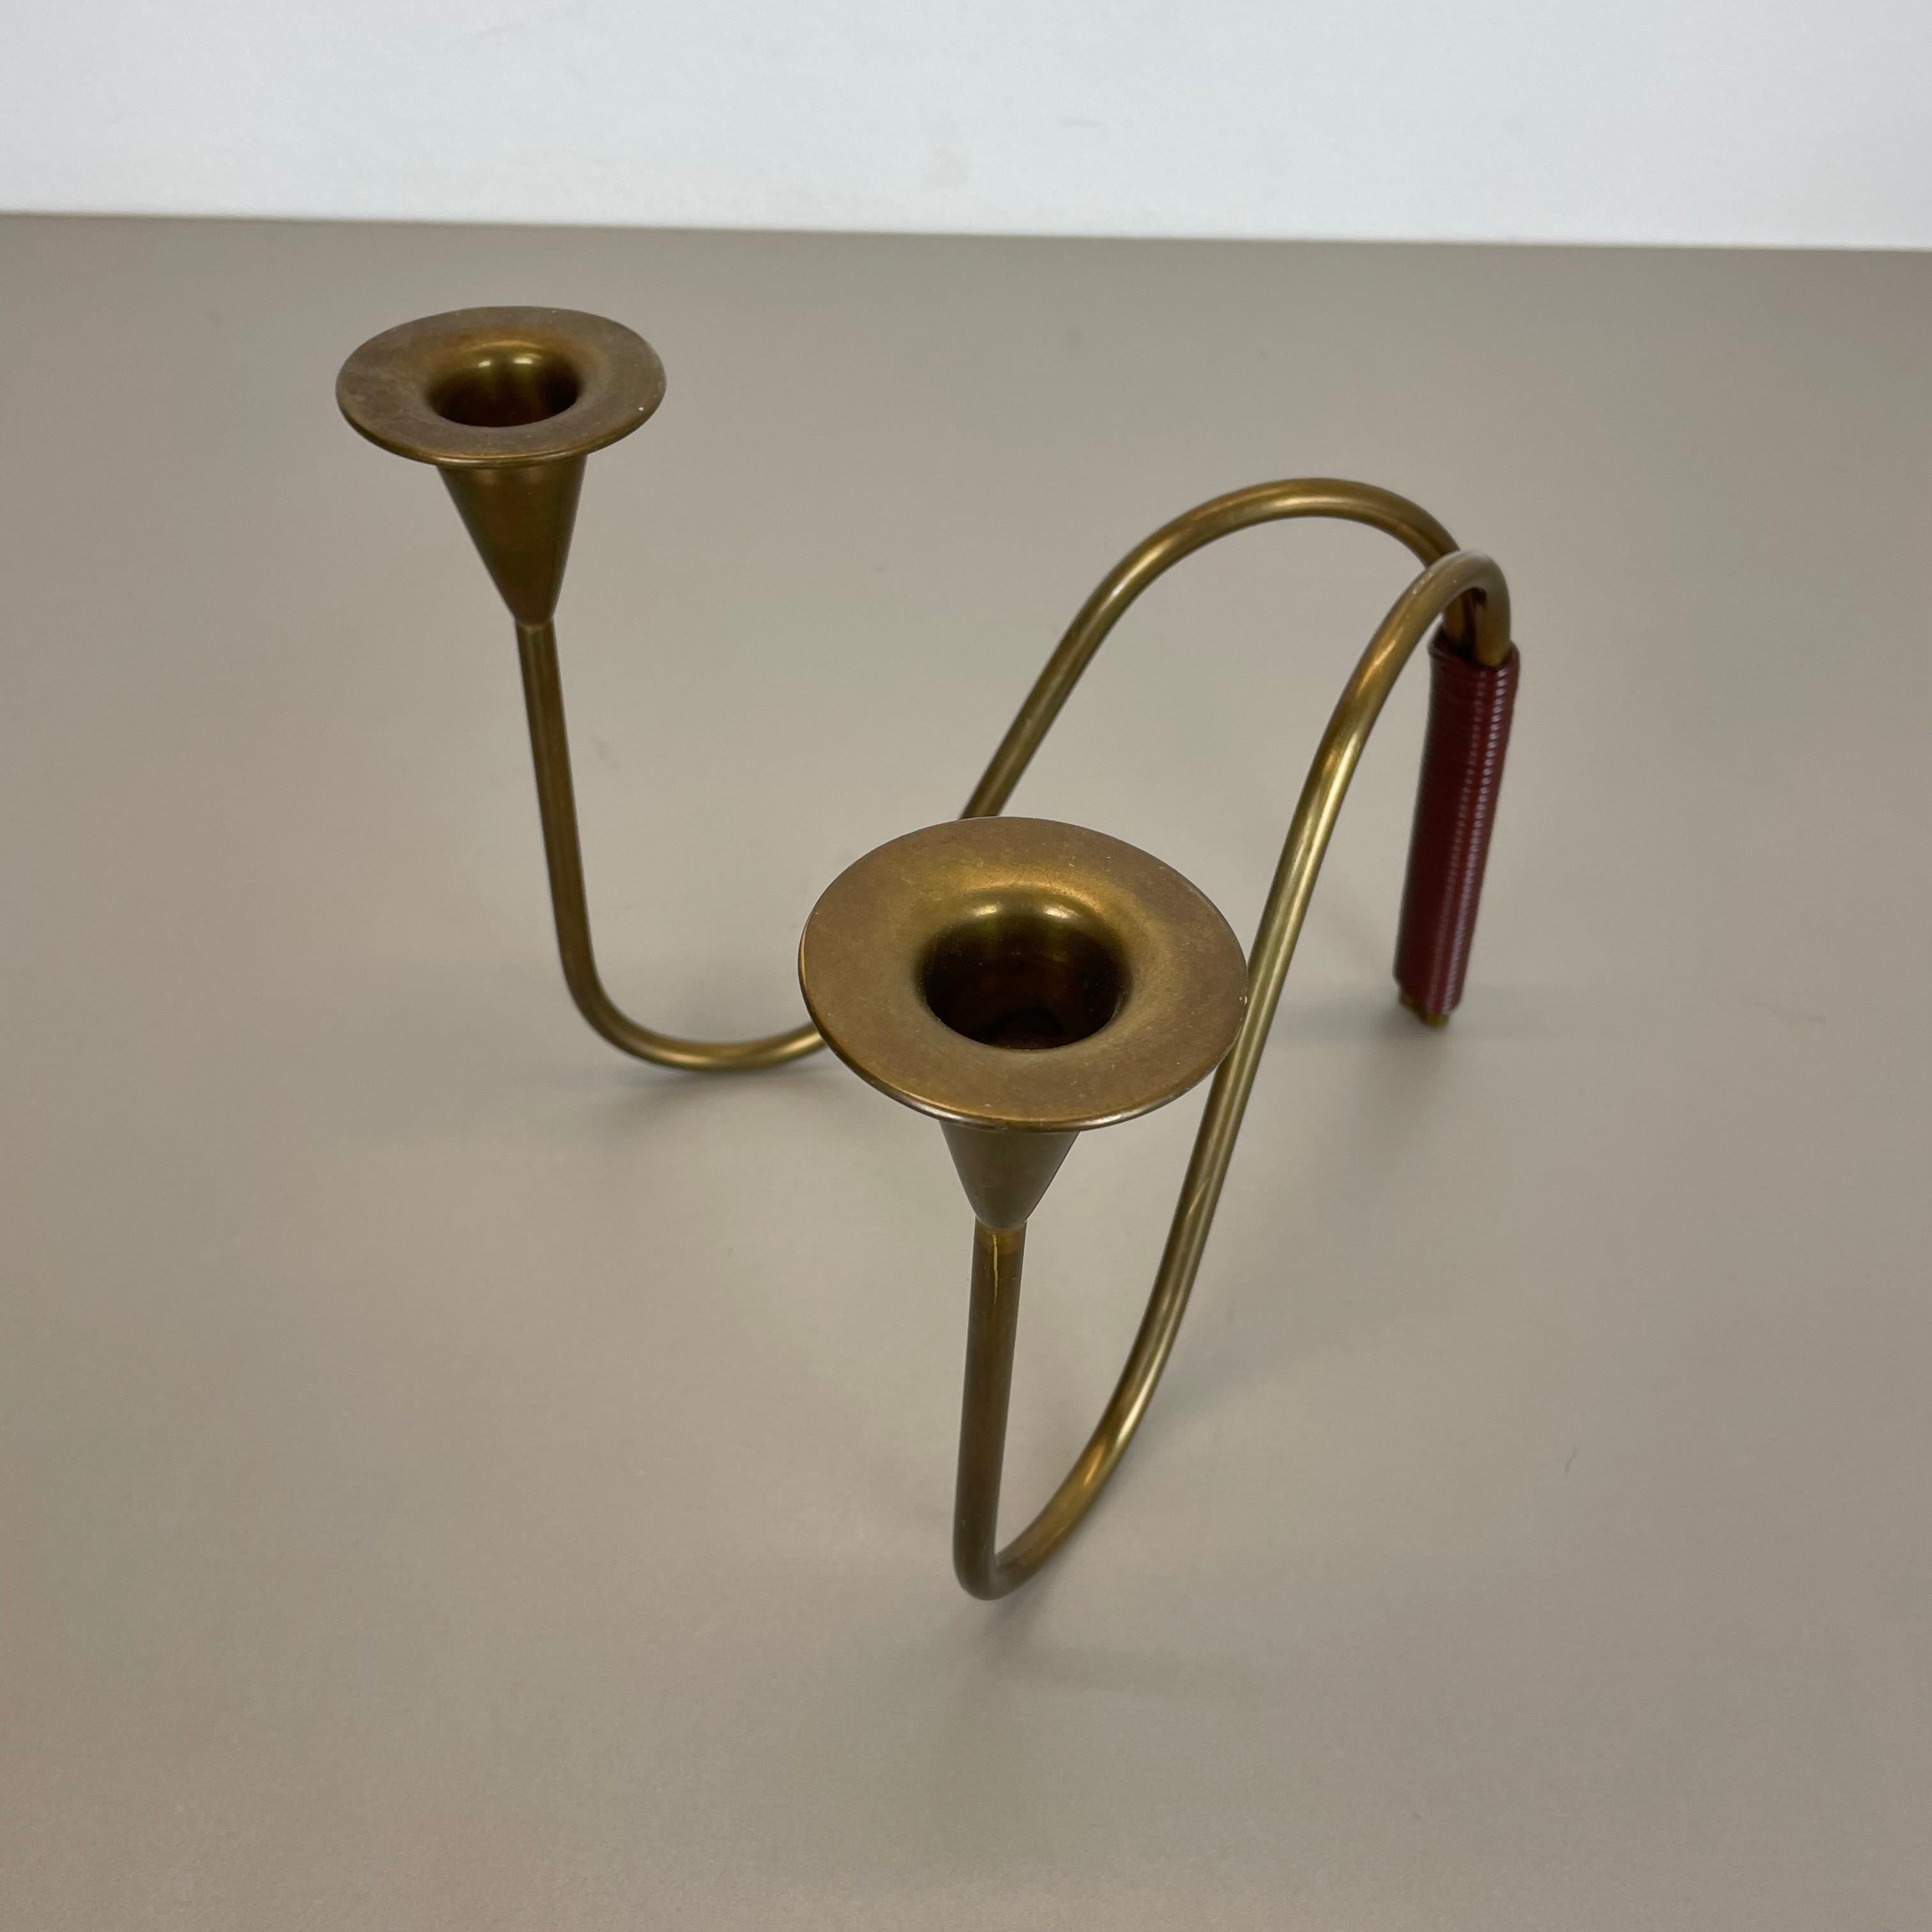 Mid-Century Modern Sculptural Brass Candleholder Object by Günter Kupetz for WMF, Germany 1950s For Sale